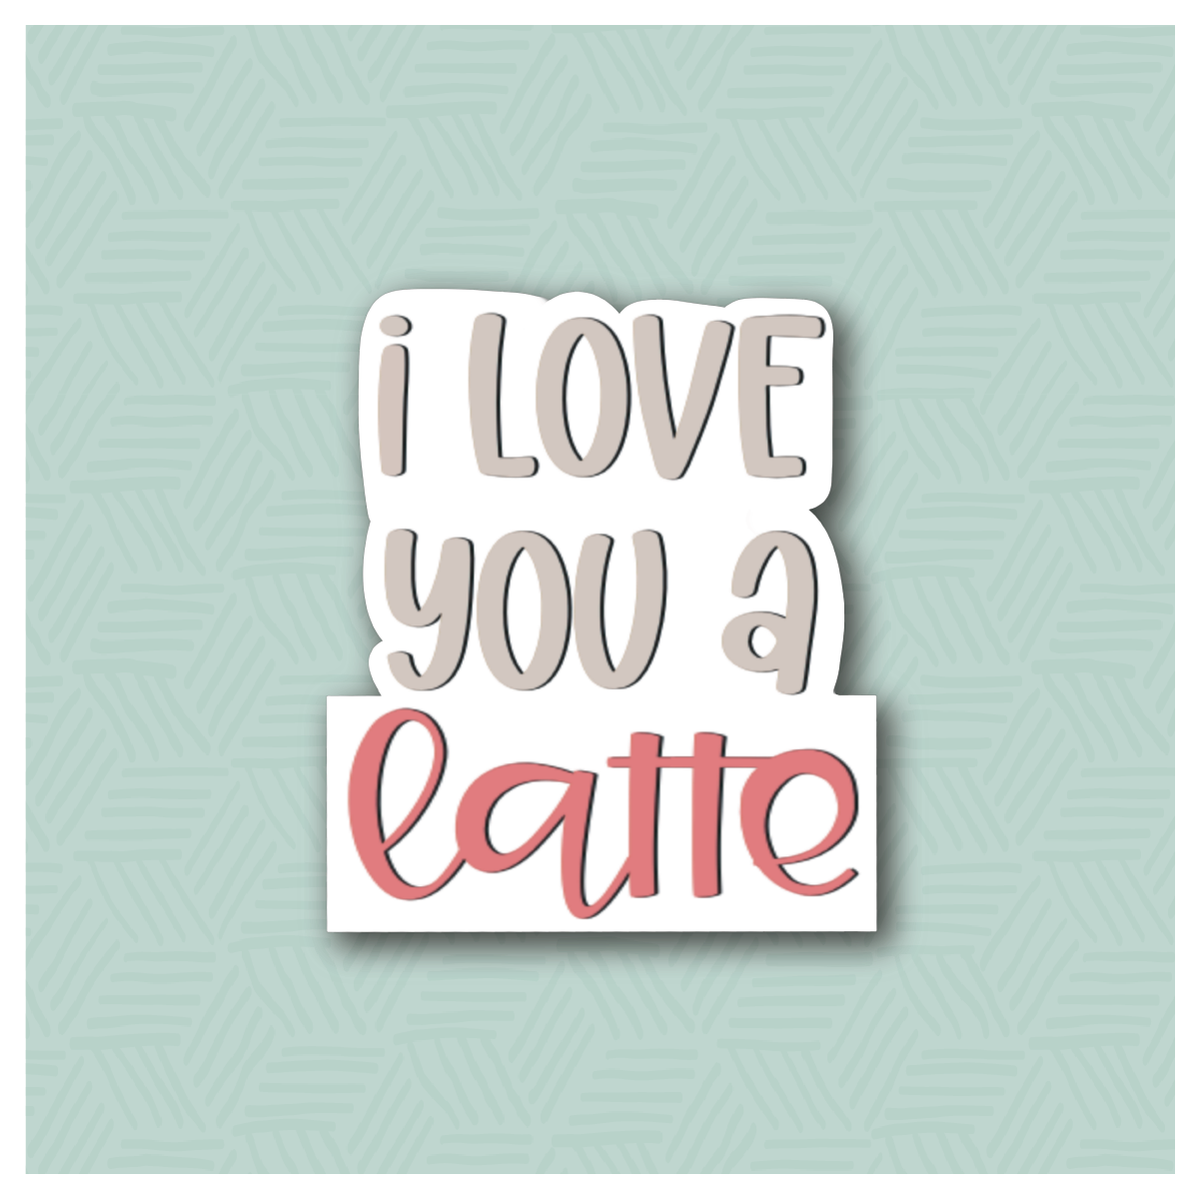 I Love You a Latte Hand Lettered Cookie Cutter